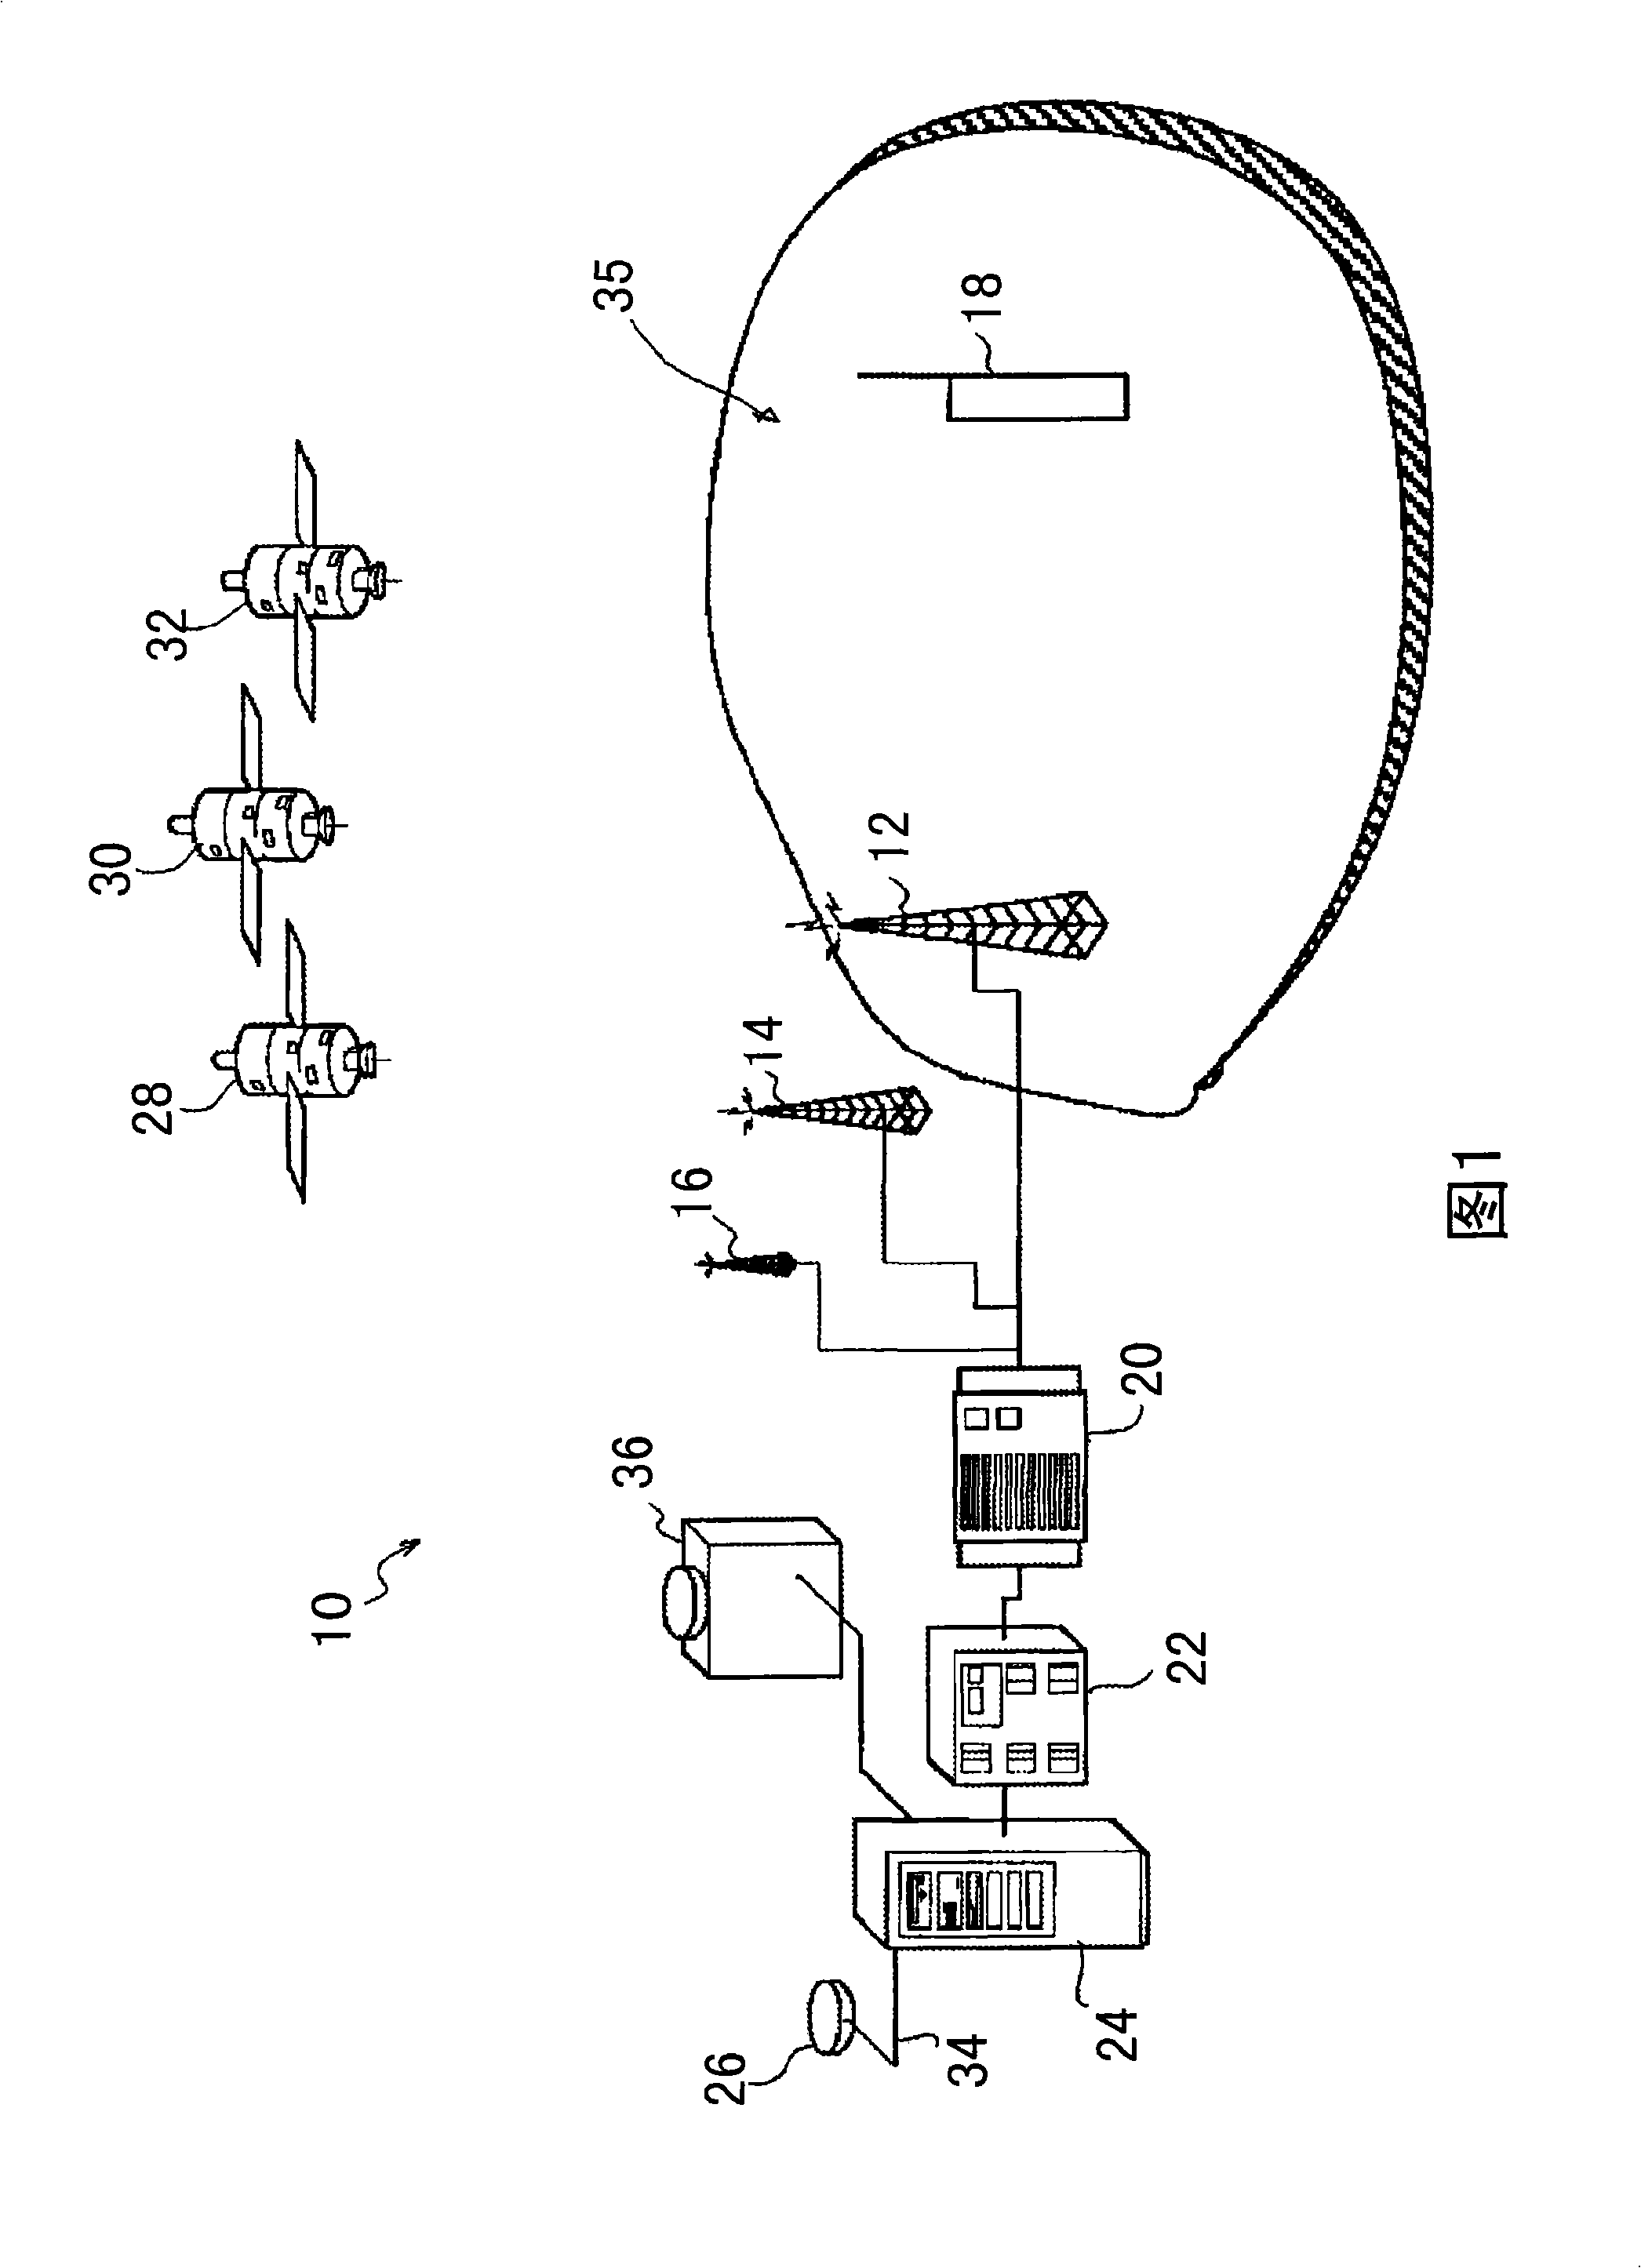 Method for providing assistance data to a mobile station of a satellite positioning system